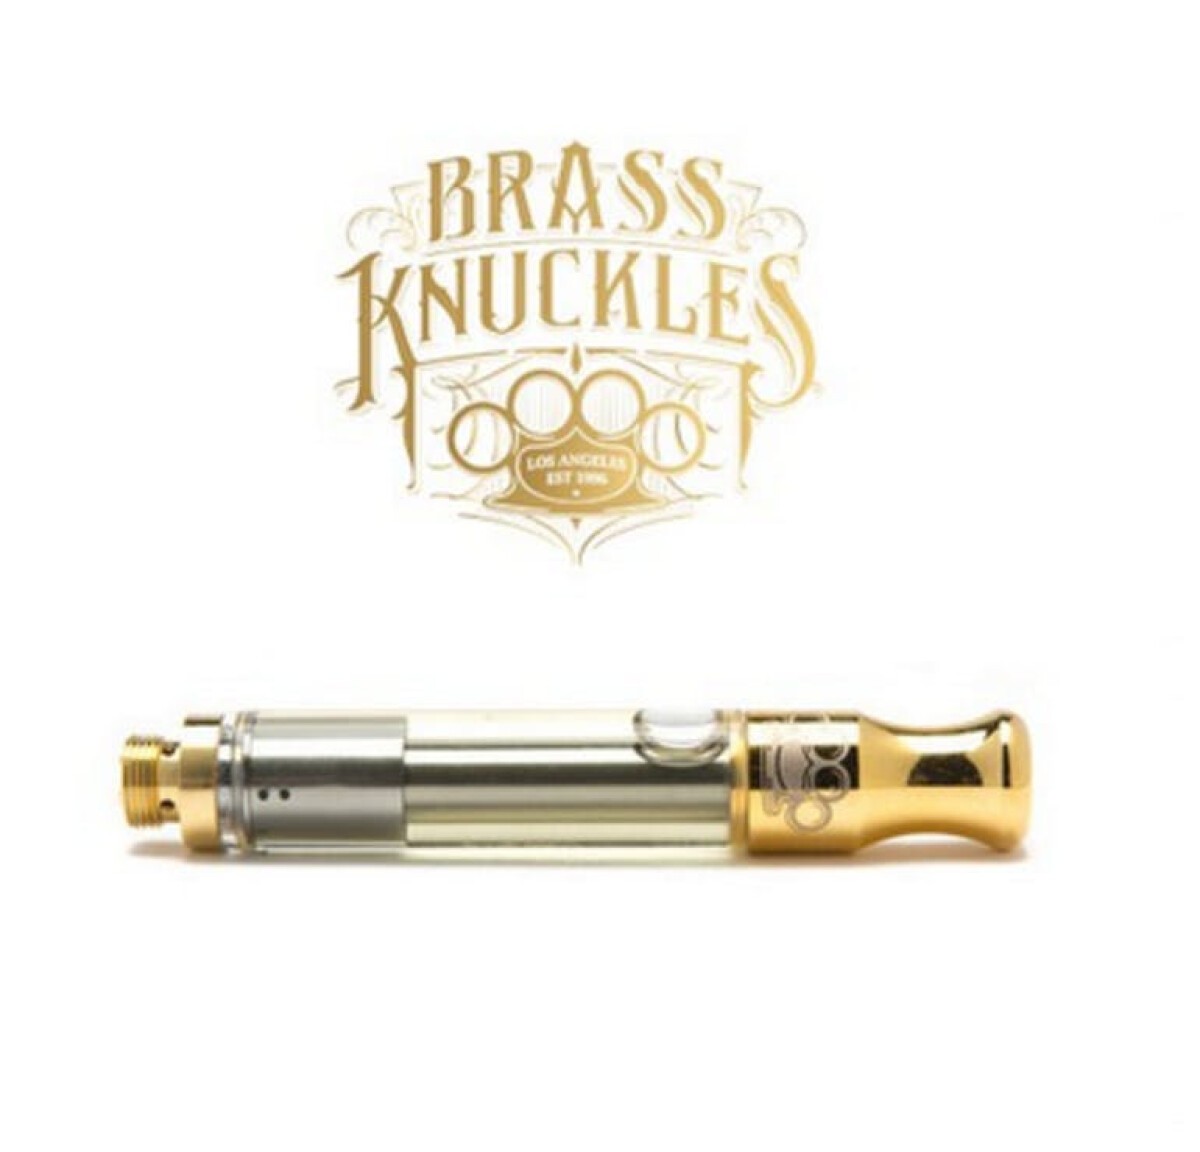 Brass Knuckles Vapes: Are Their Bad Reviews Deserved?